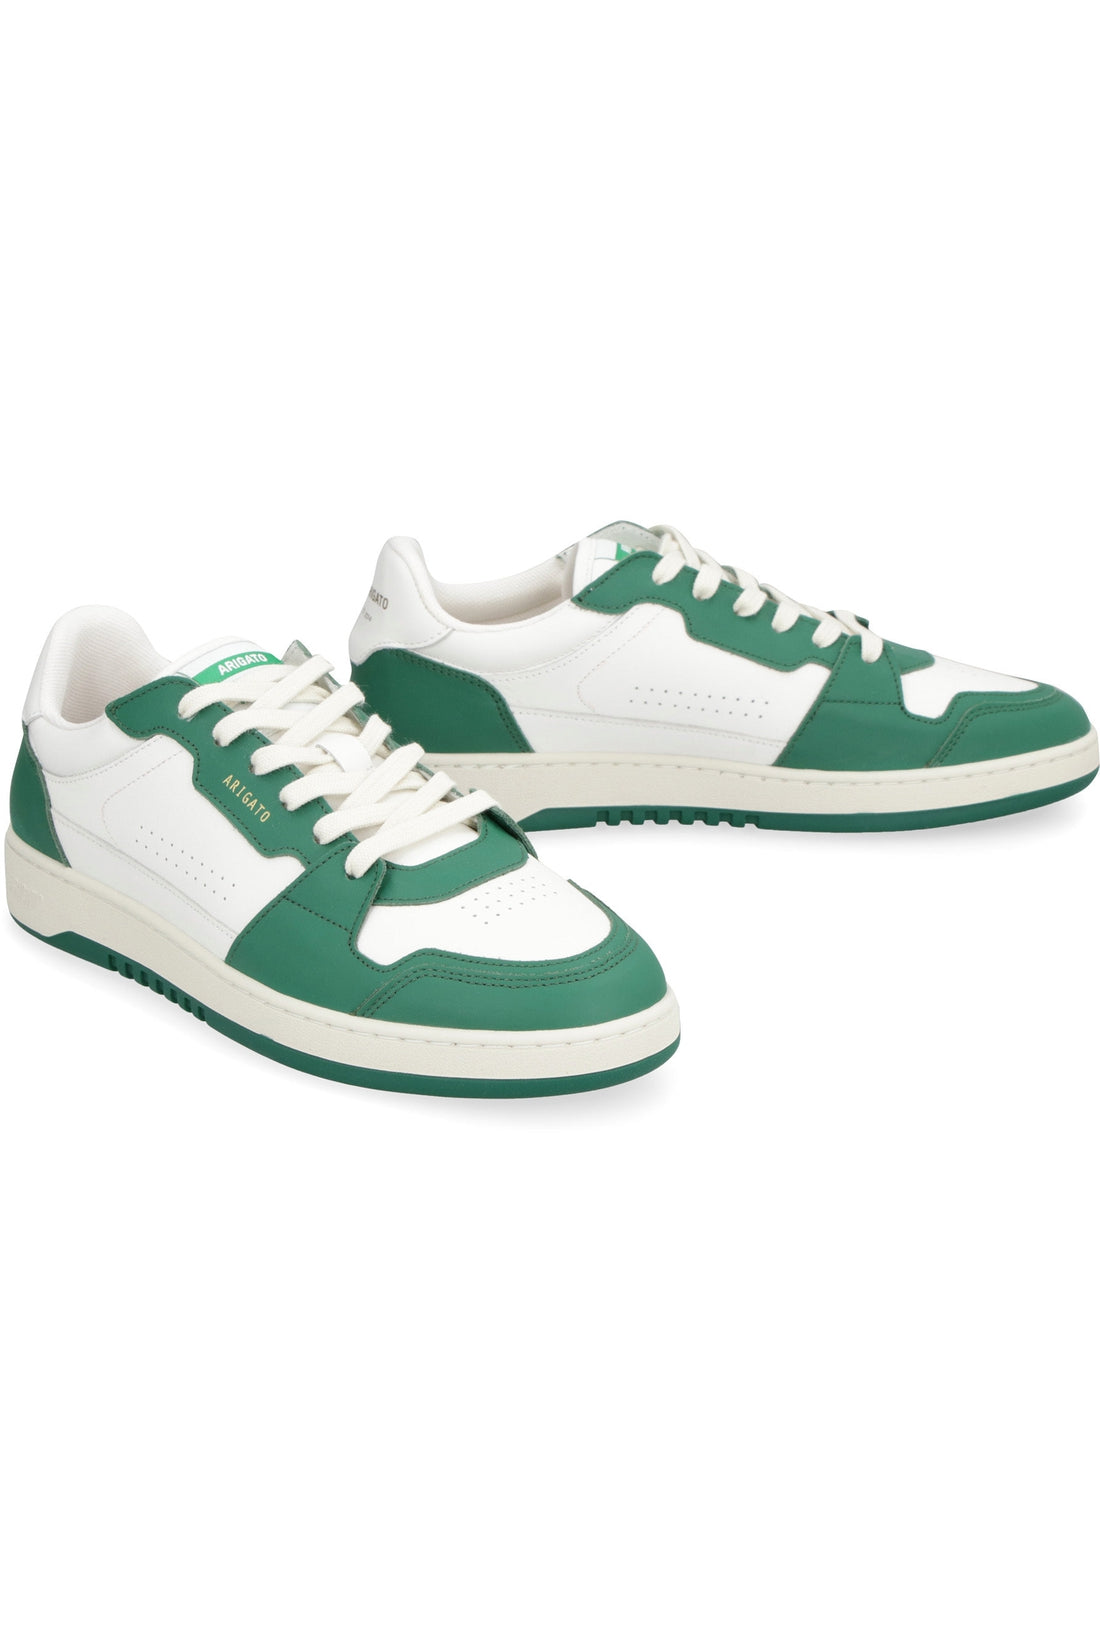 Axel Arigato-OUTLET-SALE-Dice Lo low-top sneakers-ARCHIVIST